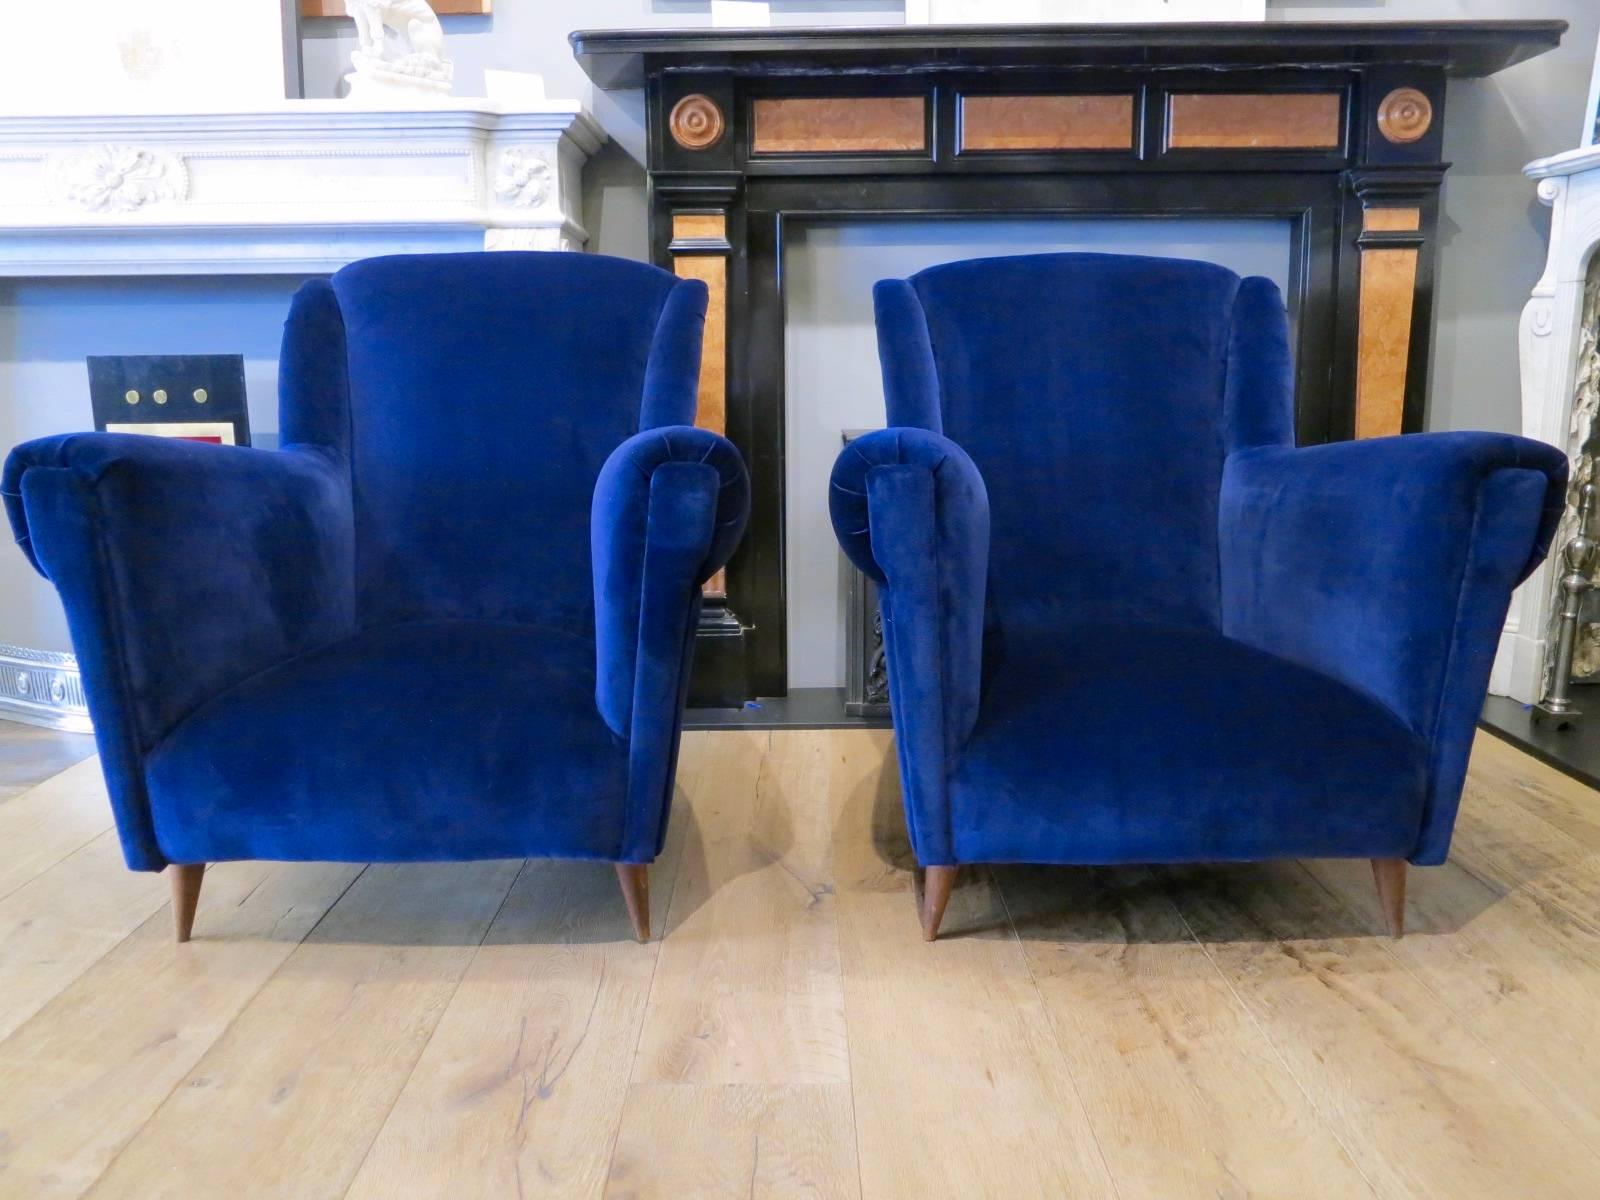 A large and deep pair of midcentury Italian armchairs, with deep seats, winged backs and wooden feet. Recovered in Pierre Frey blue velvet fabric.